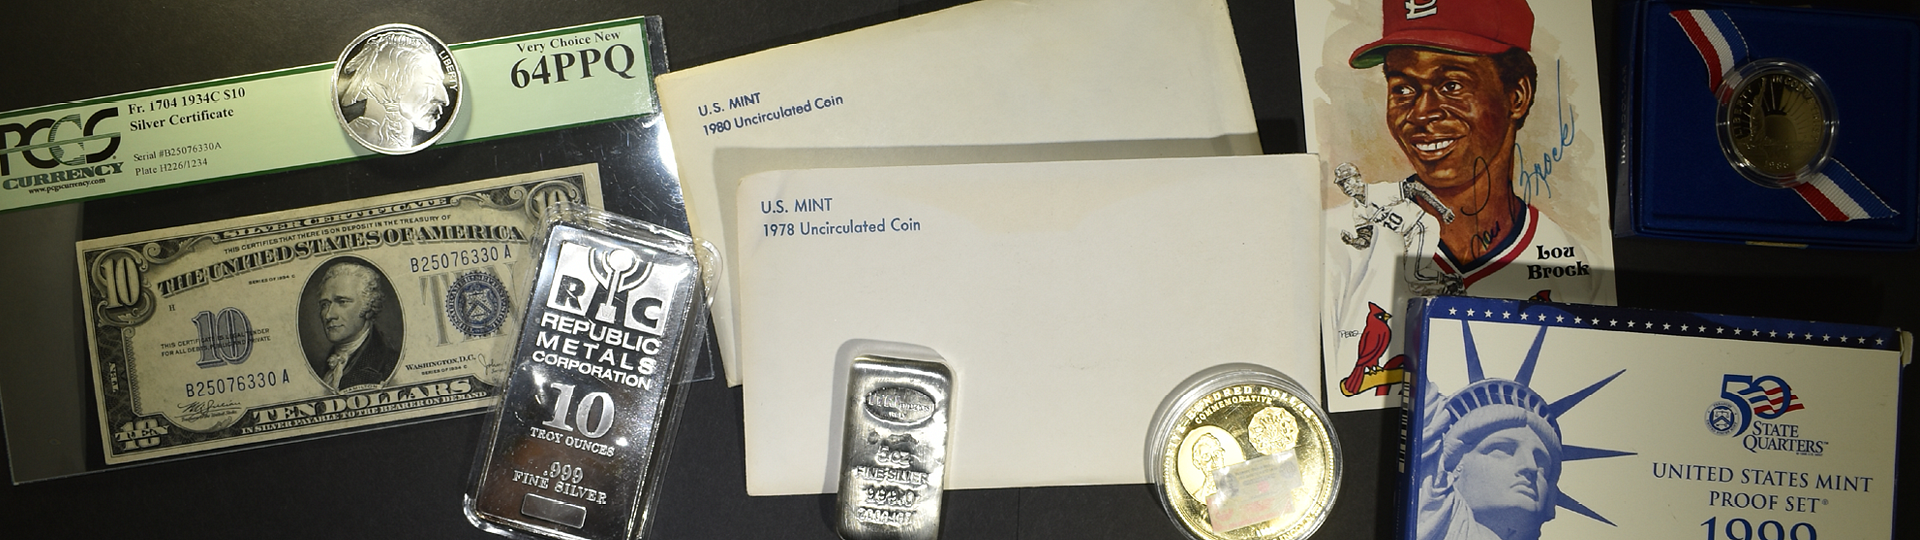 February 29th Silver City Rare Coins & Sports by Silver City Auctions